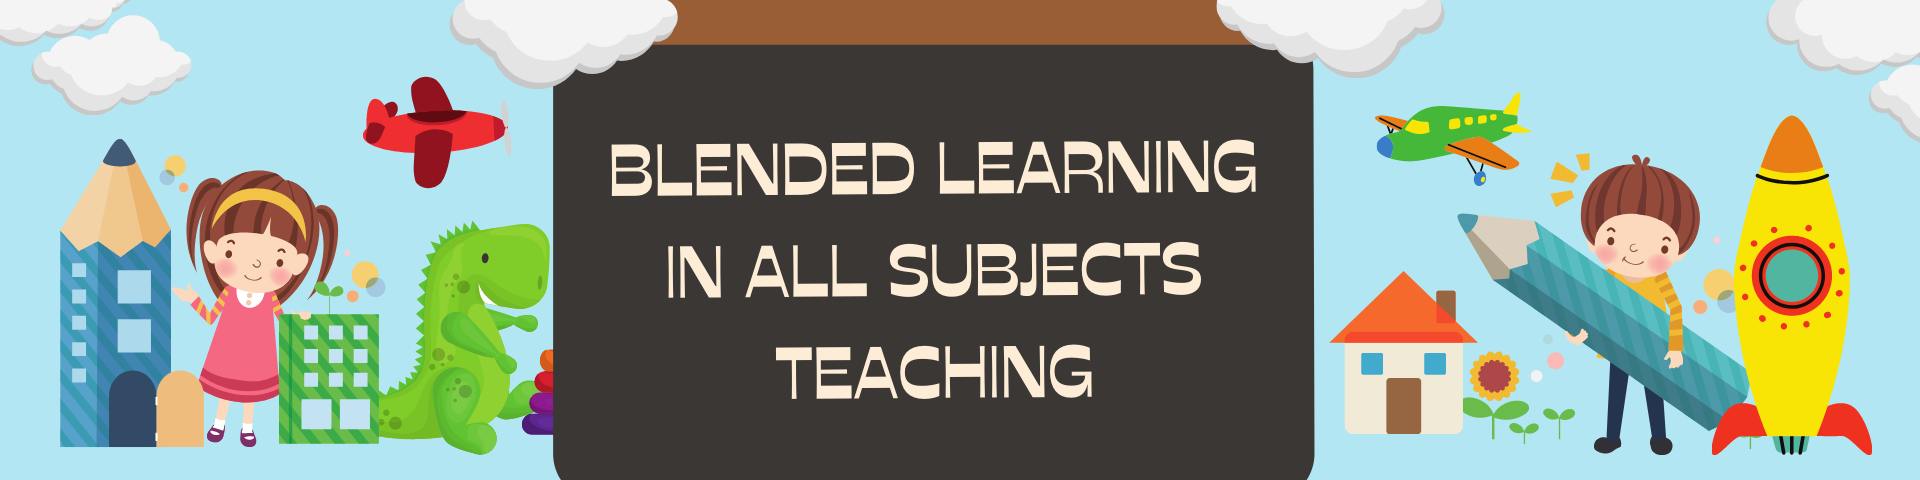 Blended Learning in All Subjects Teaching